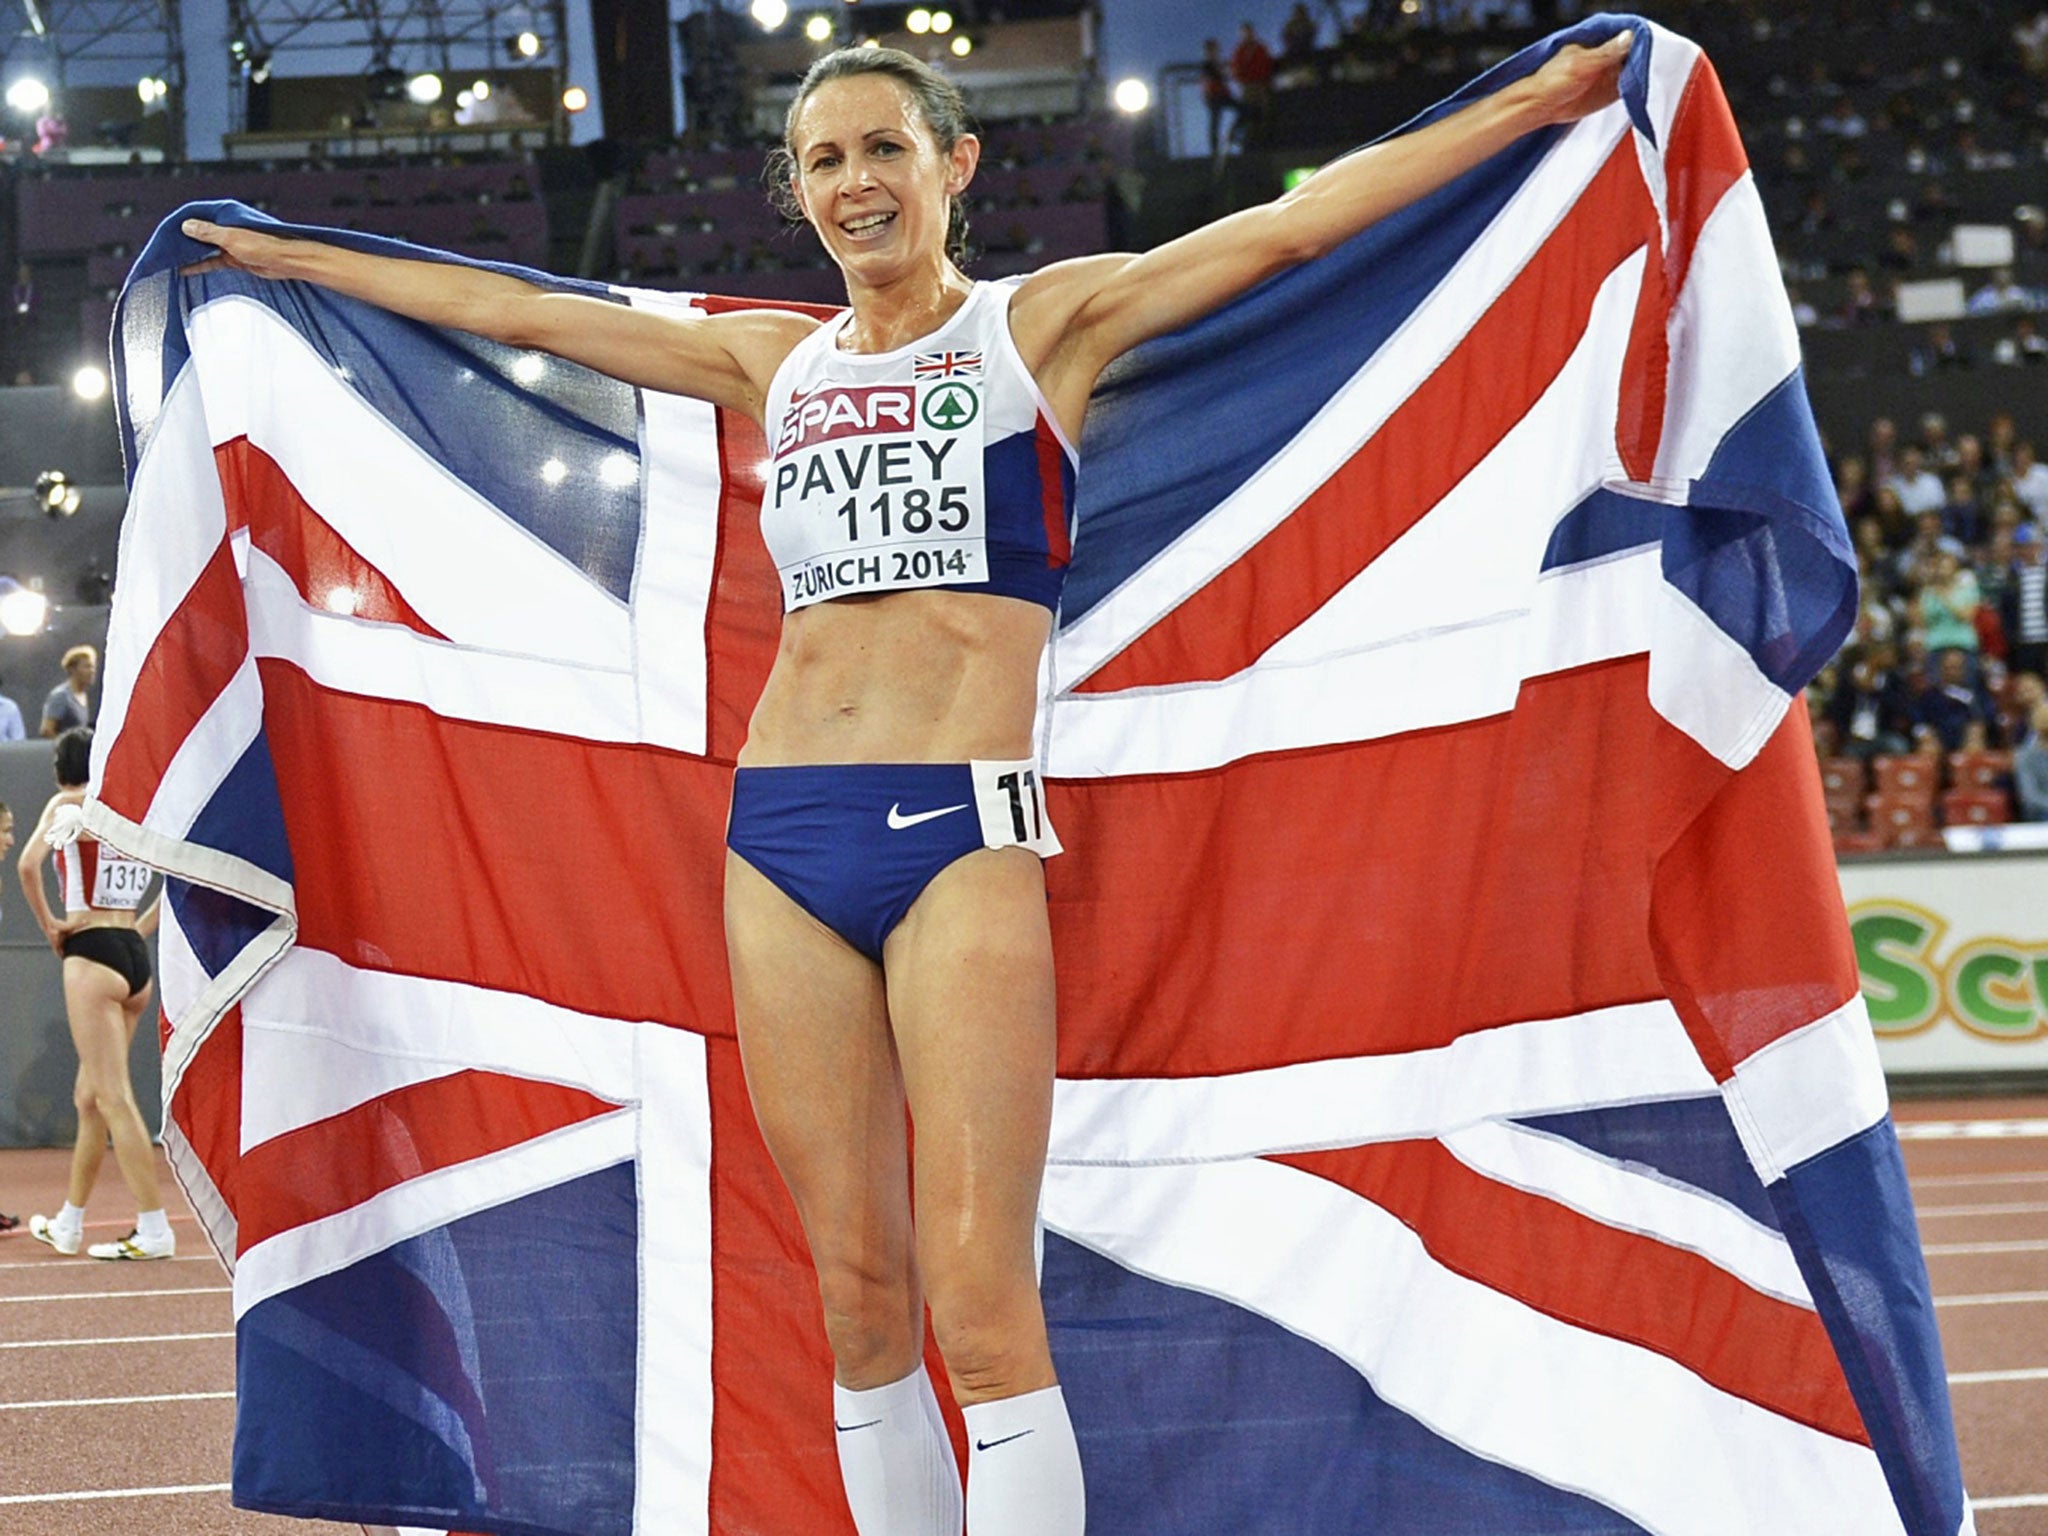 Jo Pavey soaks up the acclaim after winning gold in the 10,000m at the European Championships in Zurich last month